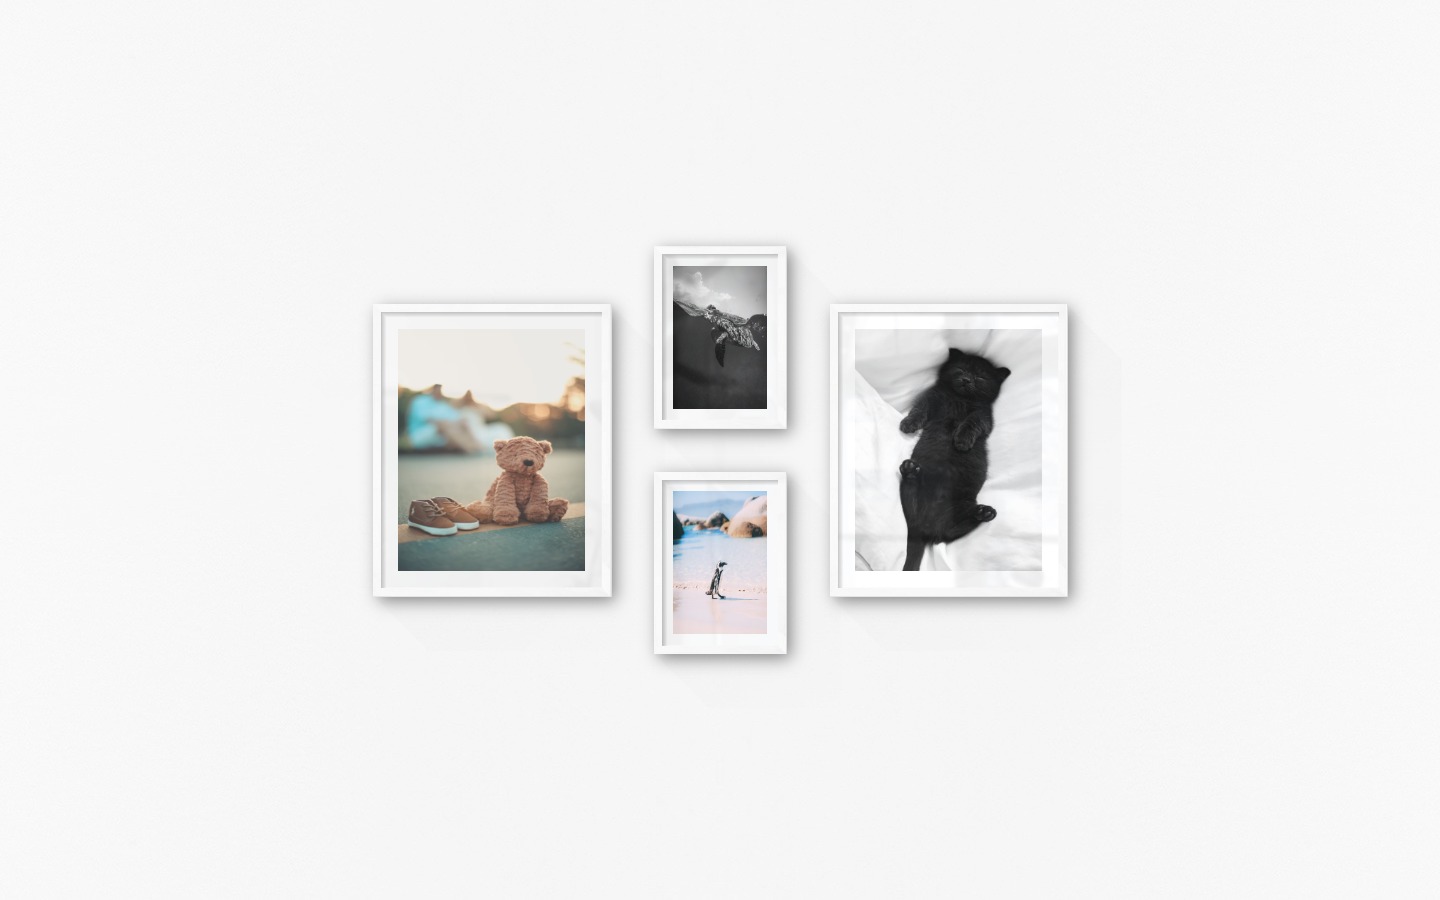 Gallery wall with picture frames in white in sizes 40x50 and 21x30 with prints "Teddy bear on the street", "Penguin on the beach", "Turtle" and "Cat in bed"